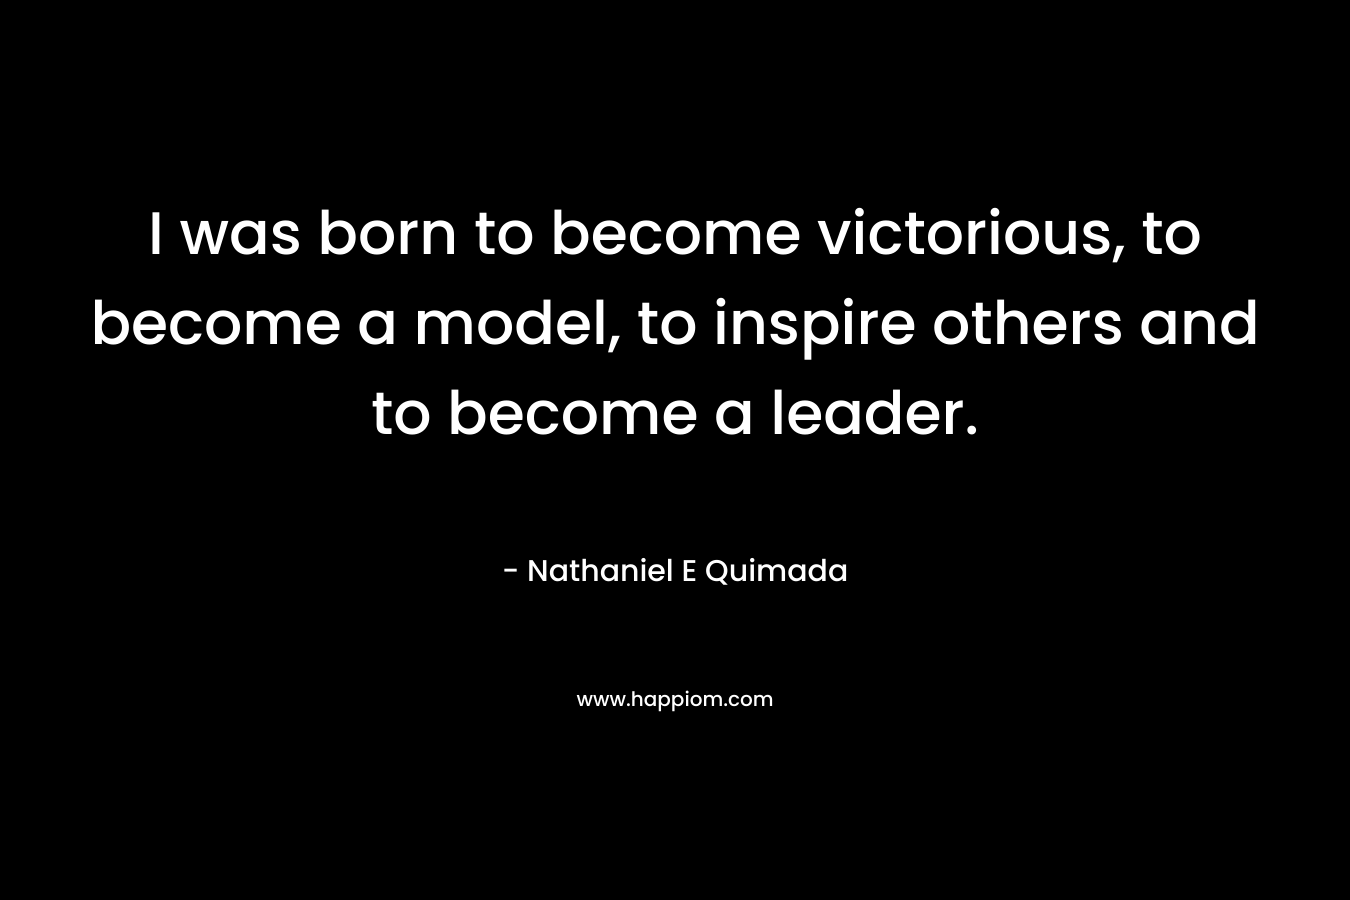 I was born to become victorious, to become a model, to inspire others and to become a leader.